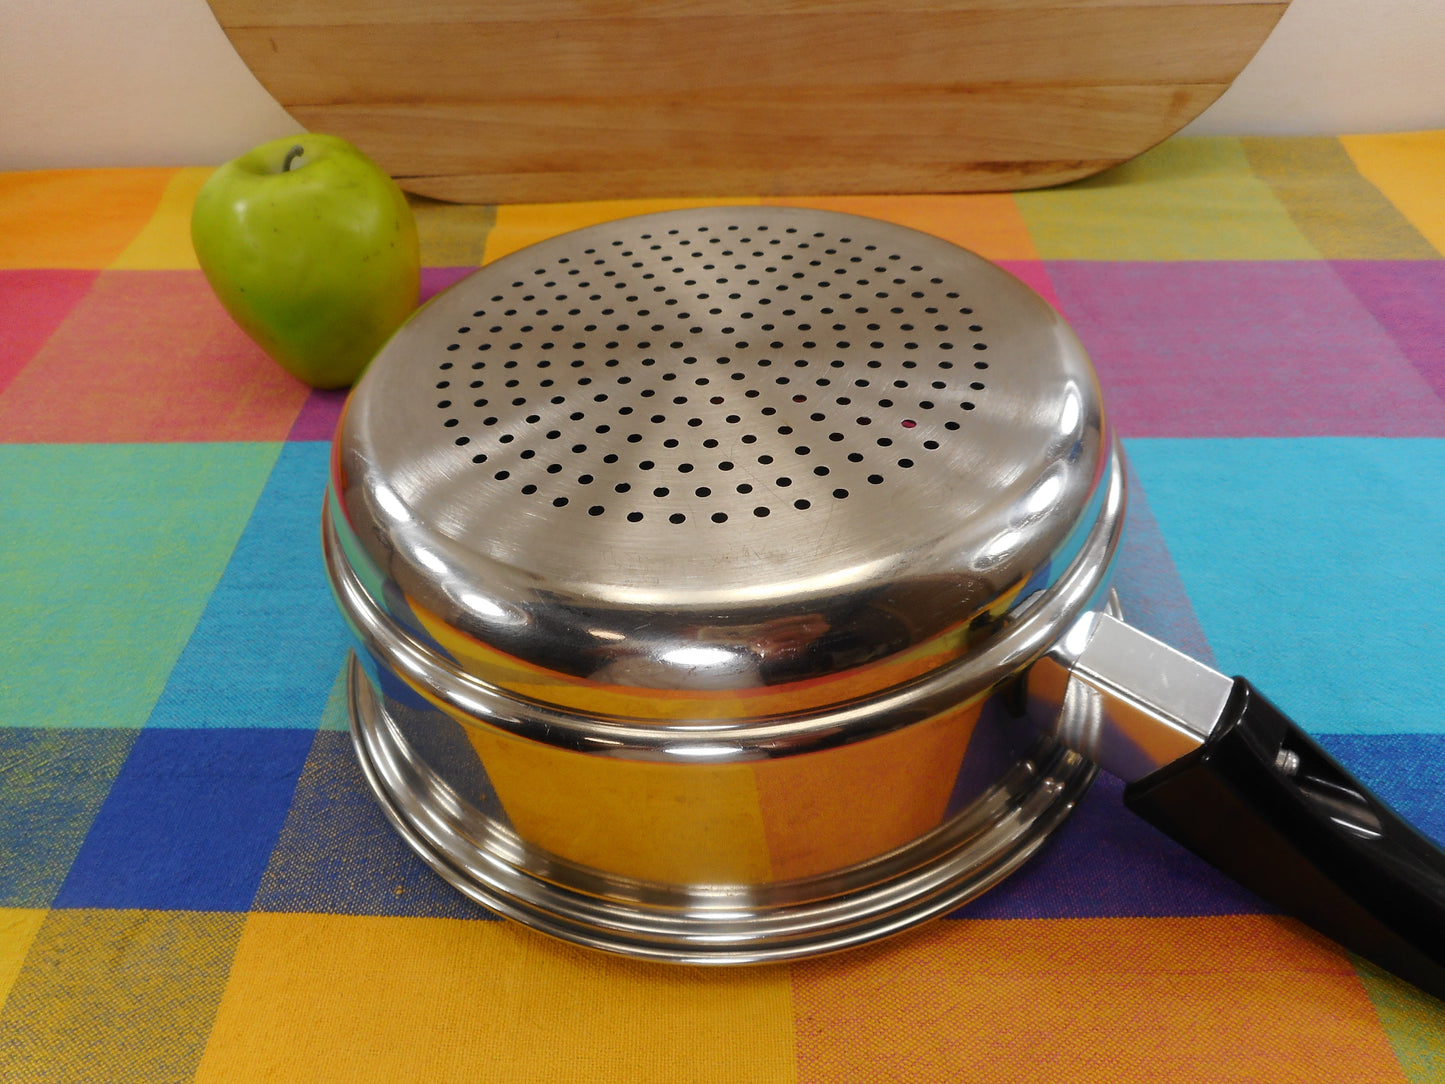 Seal-O-Matic Stainless 8" Steamer Insert for Saucepans - Hook Handle Vintage